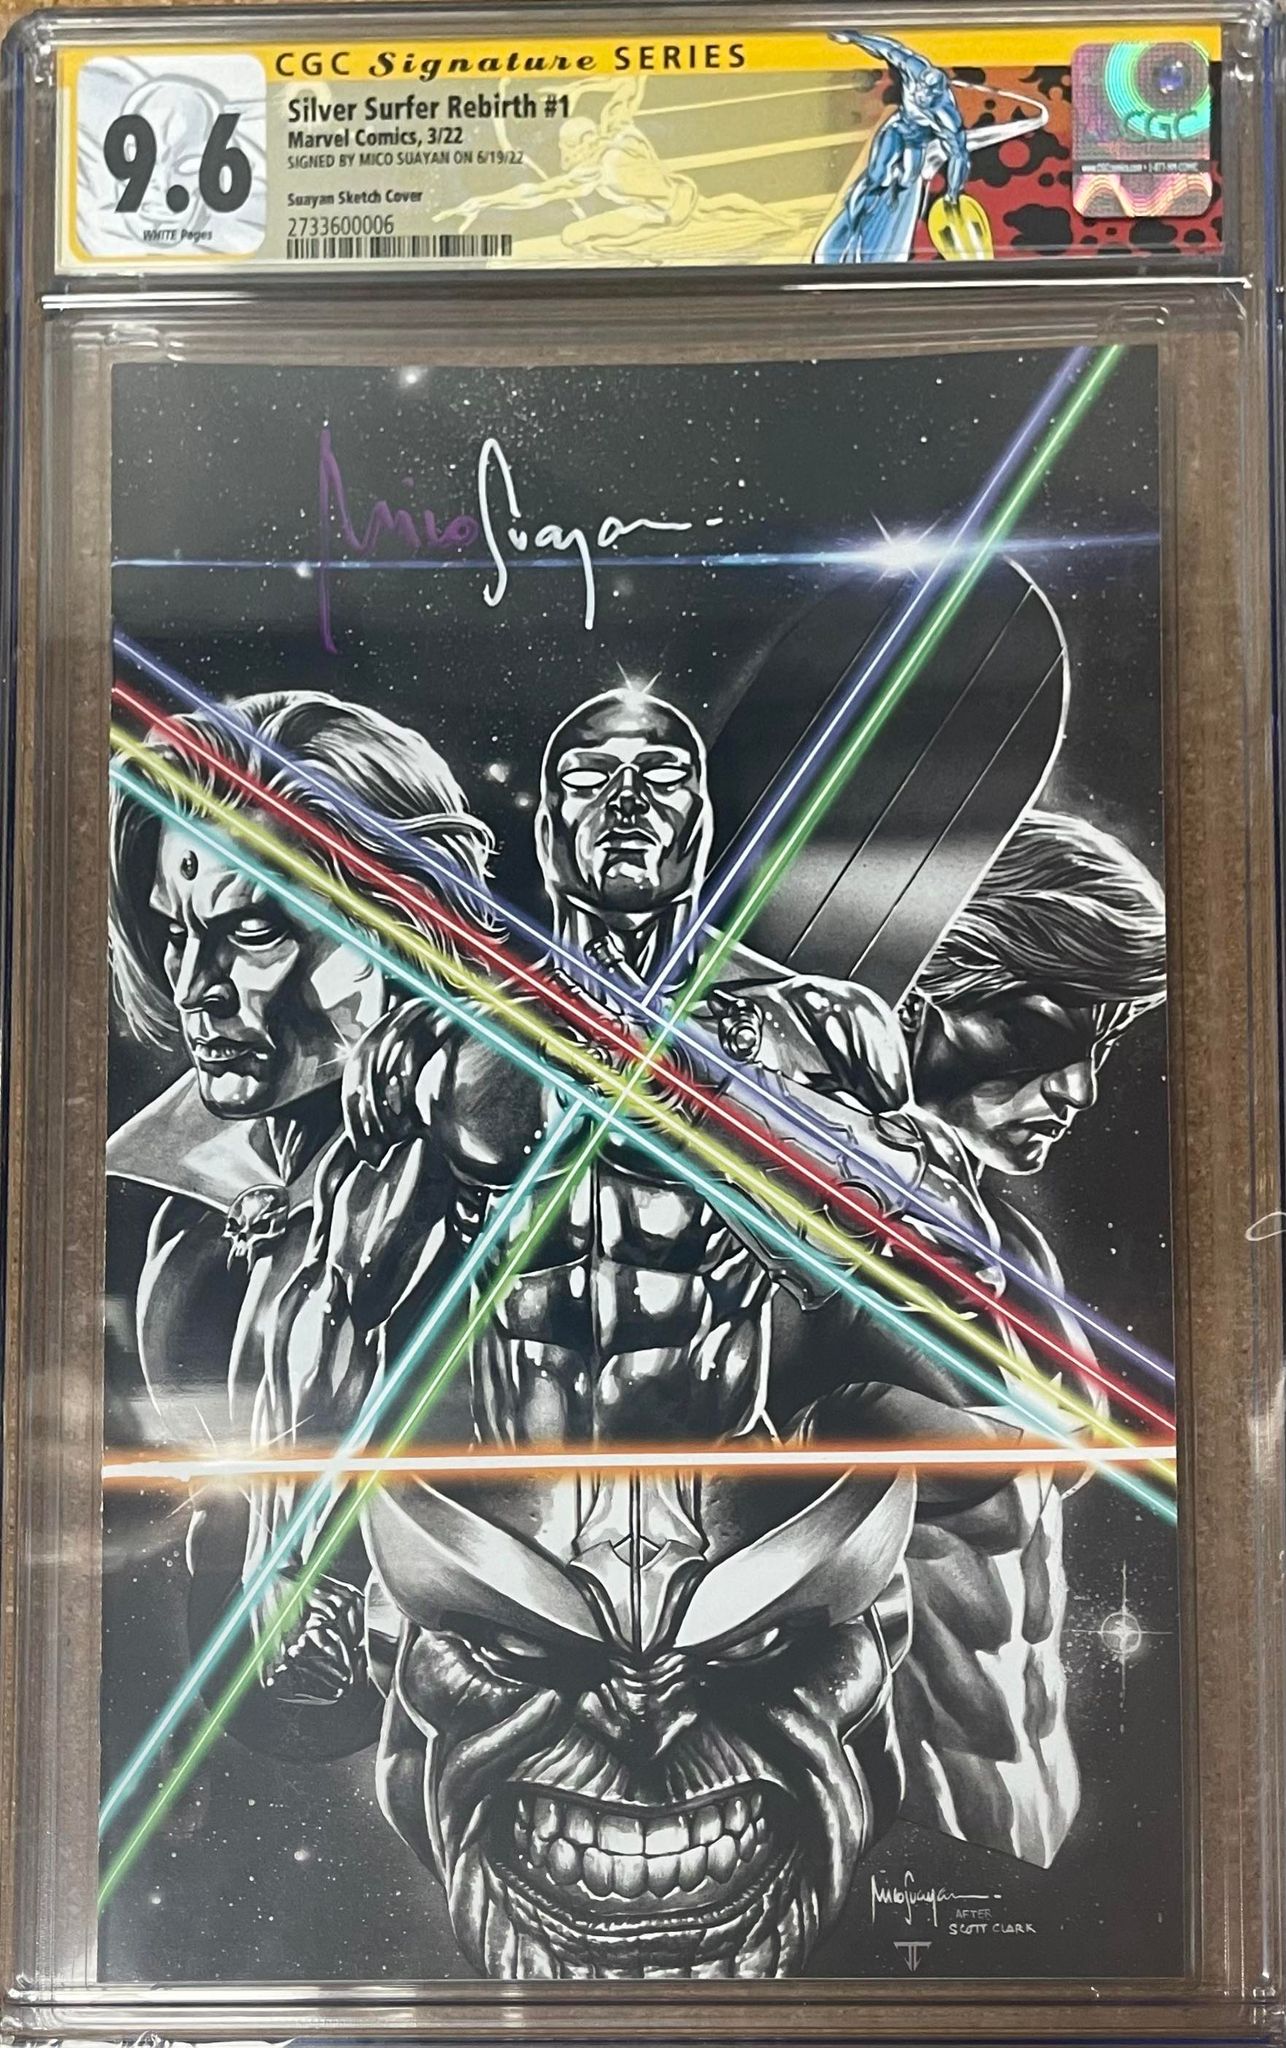 SILVER SURFER REBIRTH #1 CONVENTION EXCLUSIVE VARIANT SIGNED BY MICO SUAYAN W/RETIRED SILVER SURFER CUSTOM LABEL CGC 9.6